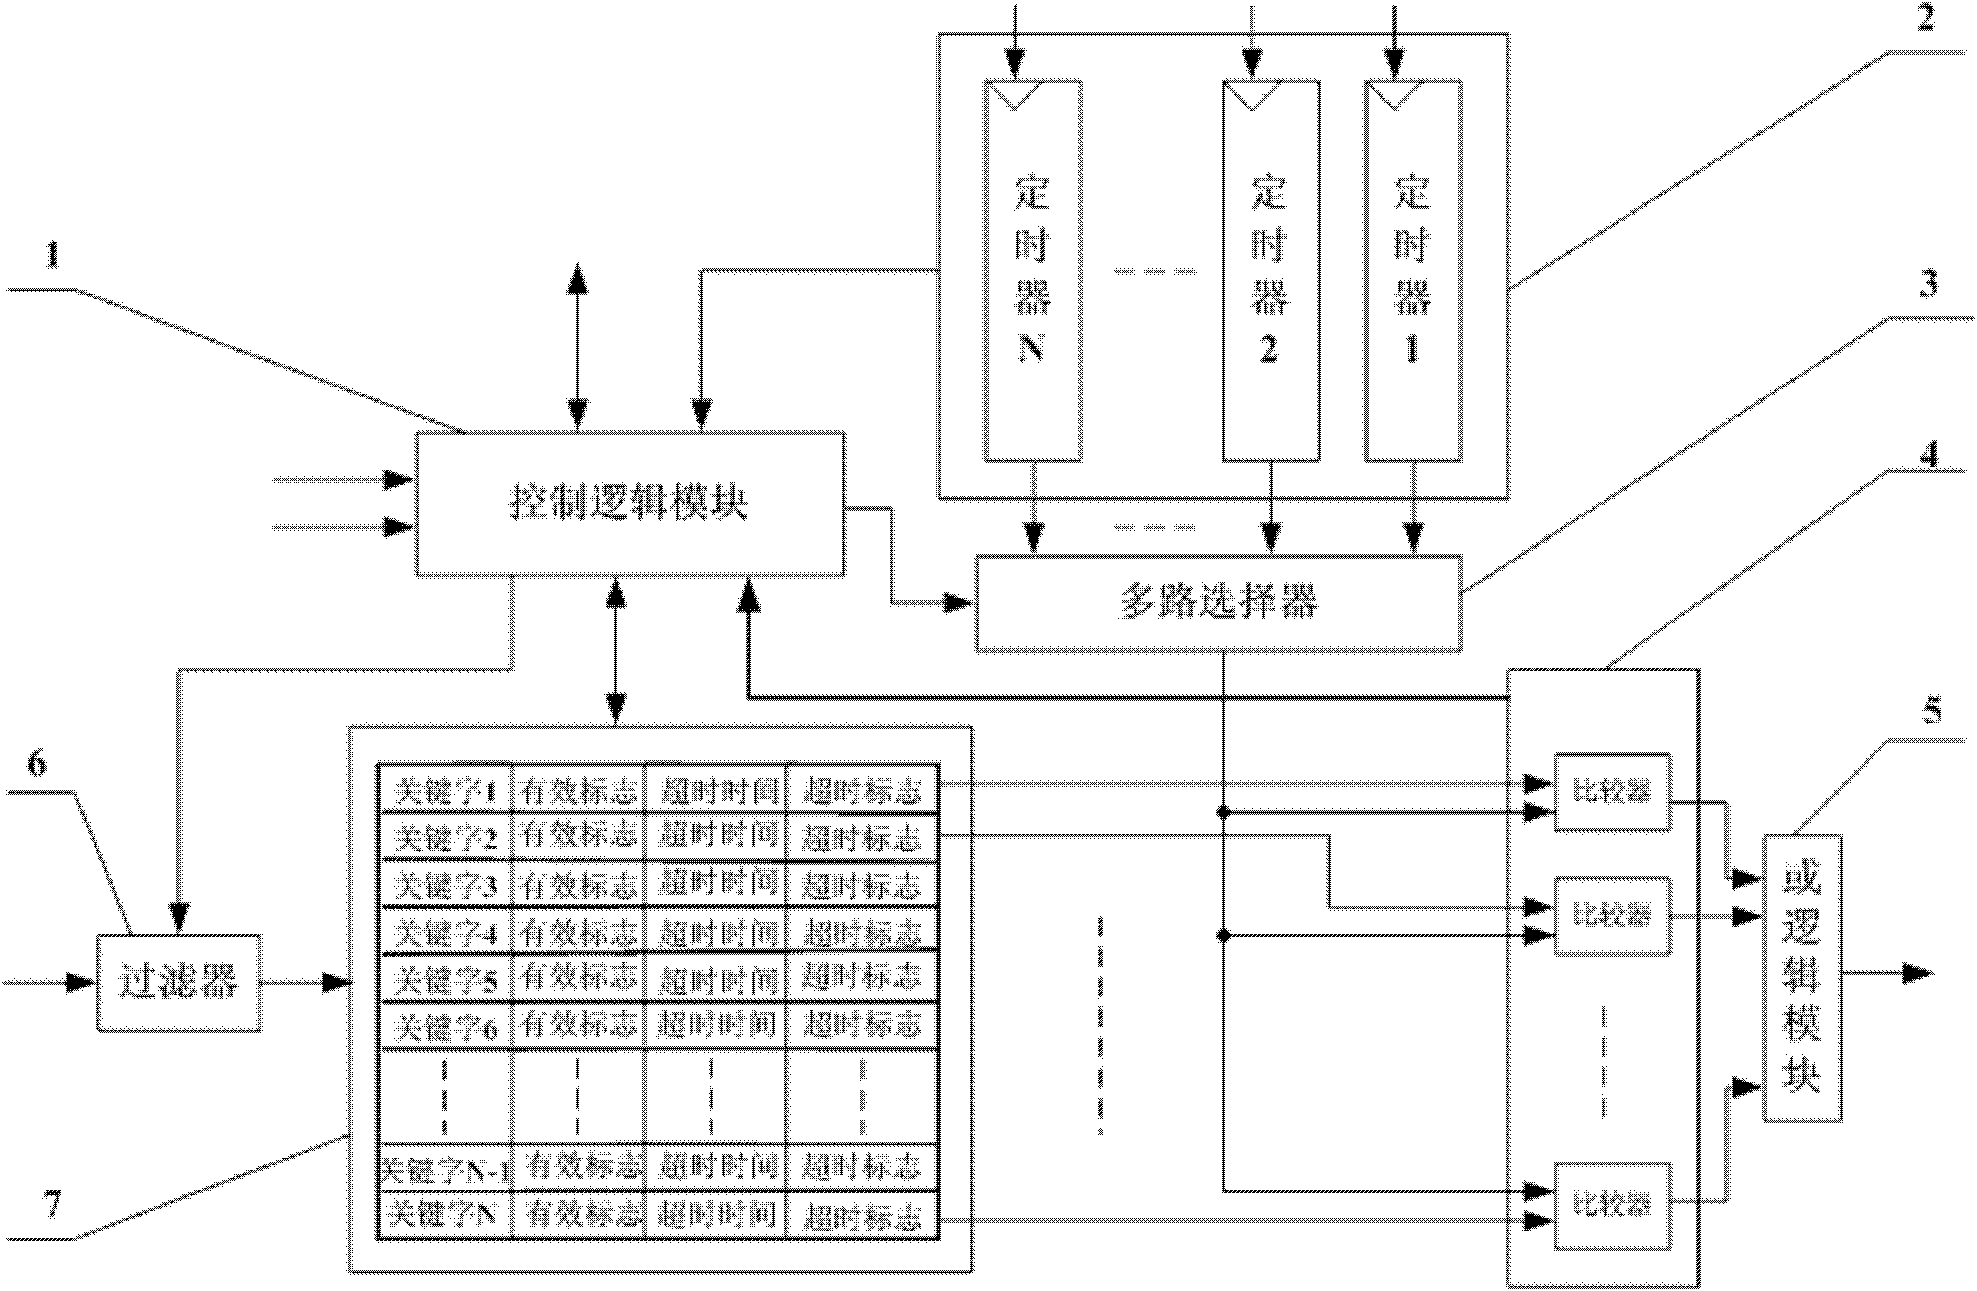 Hardware design structure of overtime timer in communication protocol processor